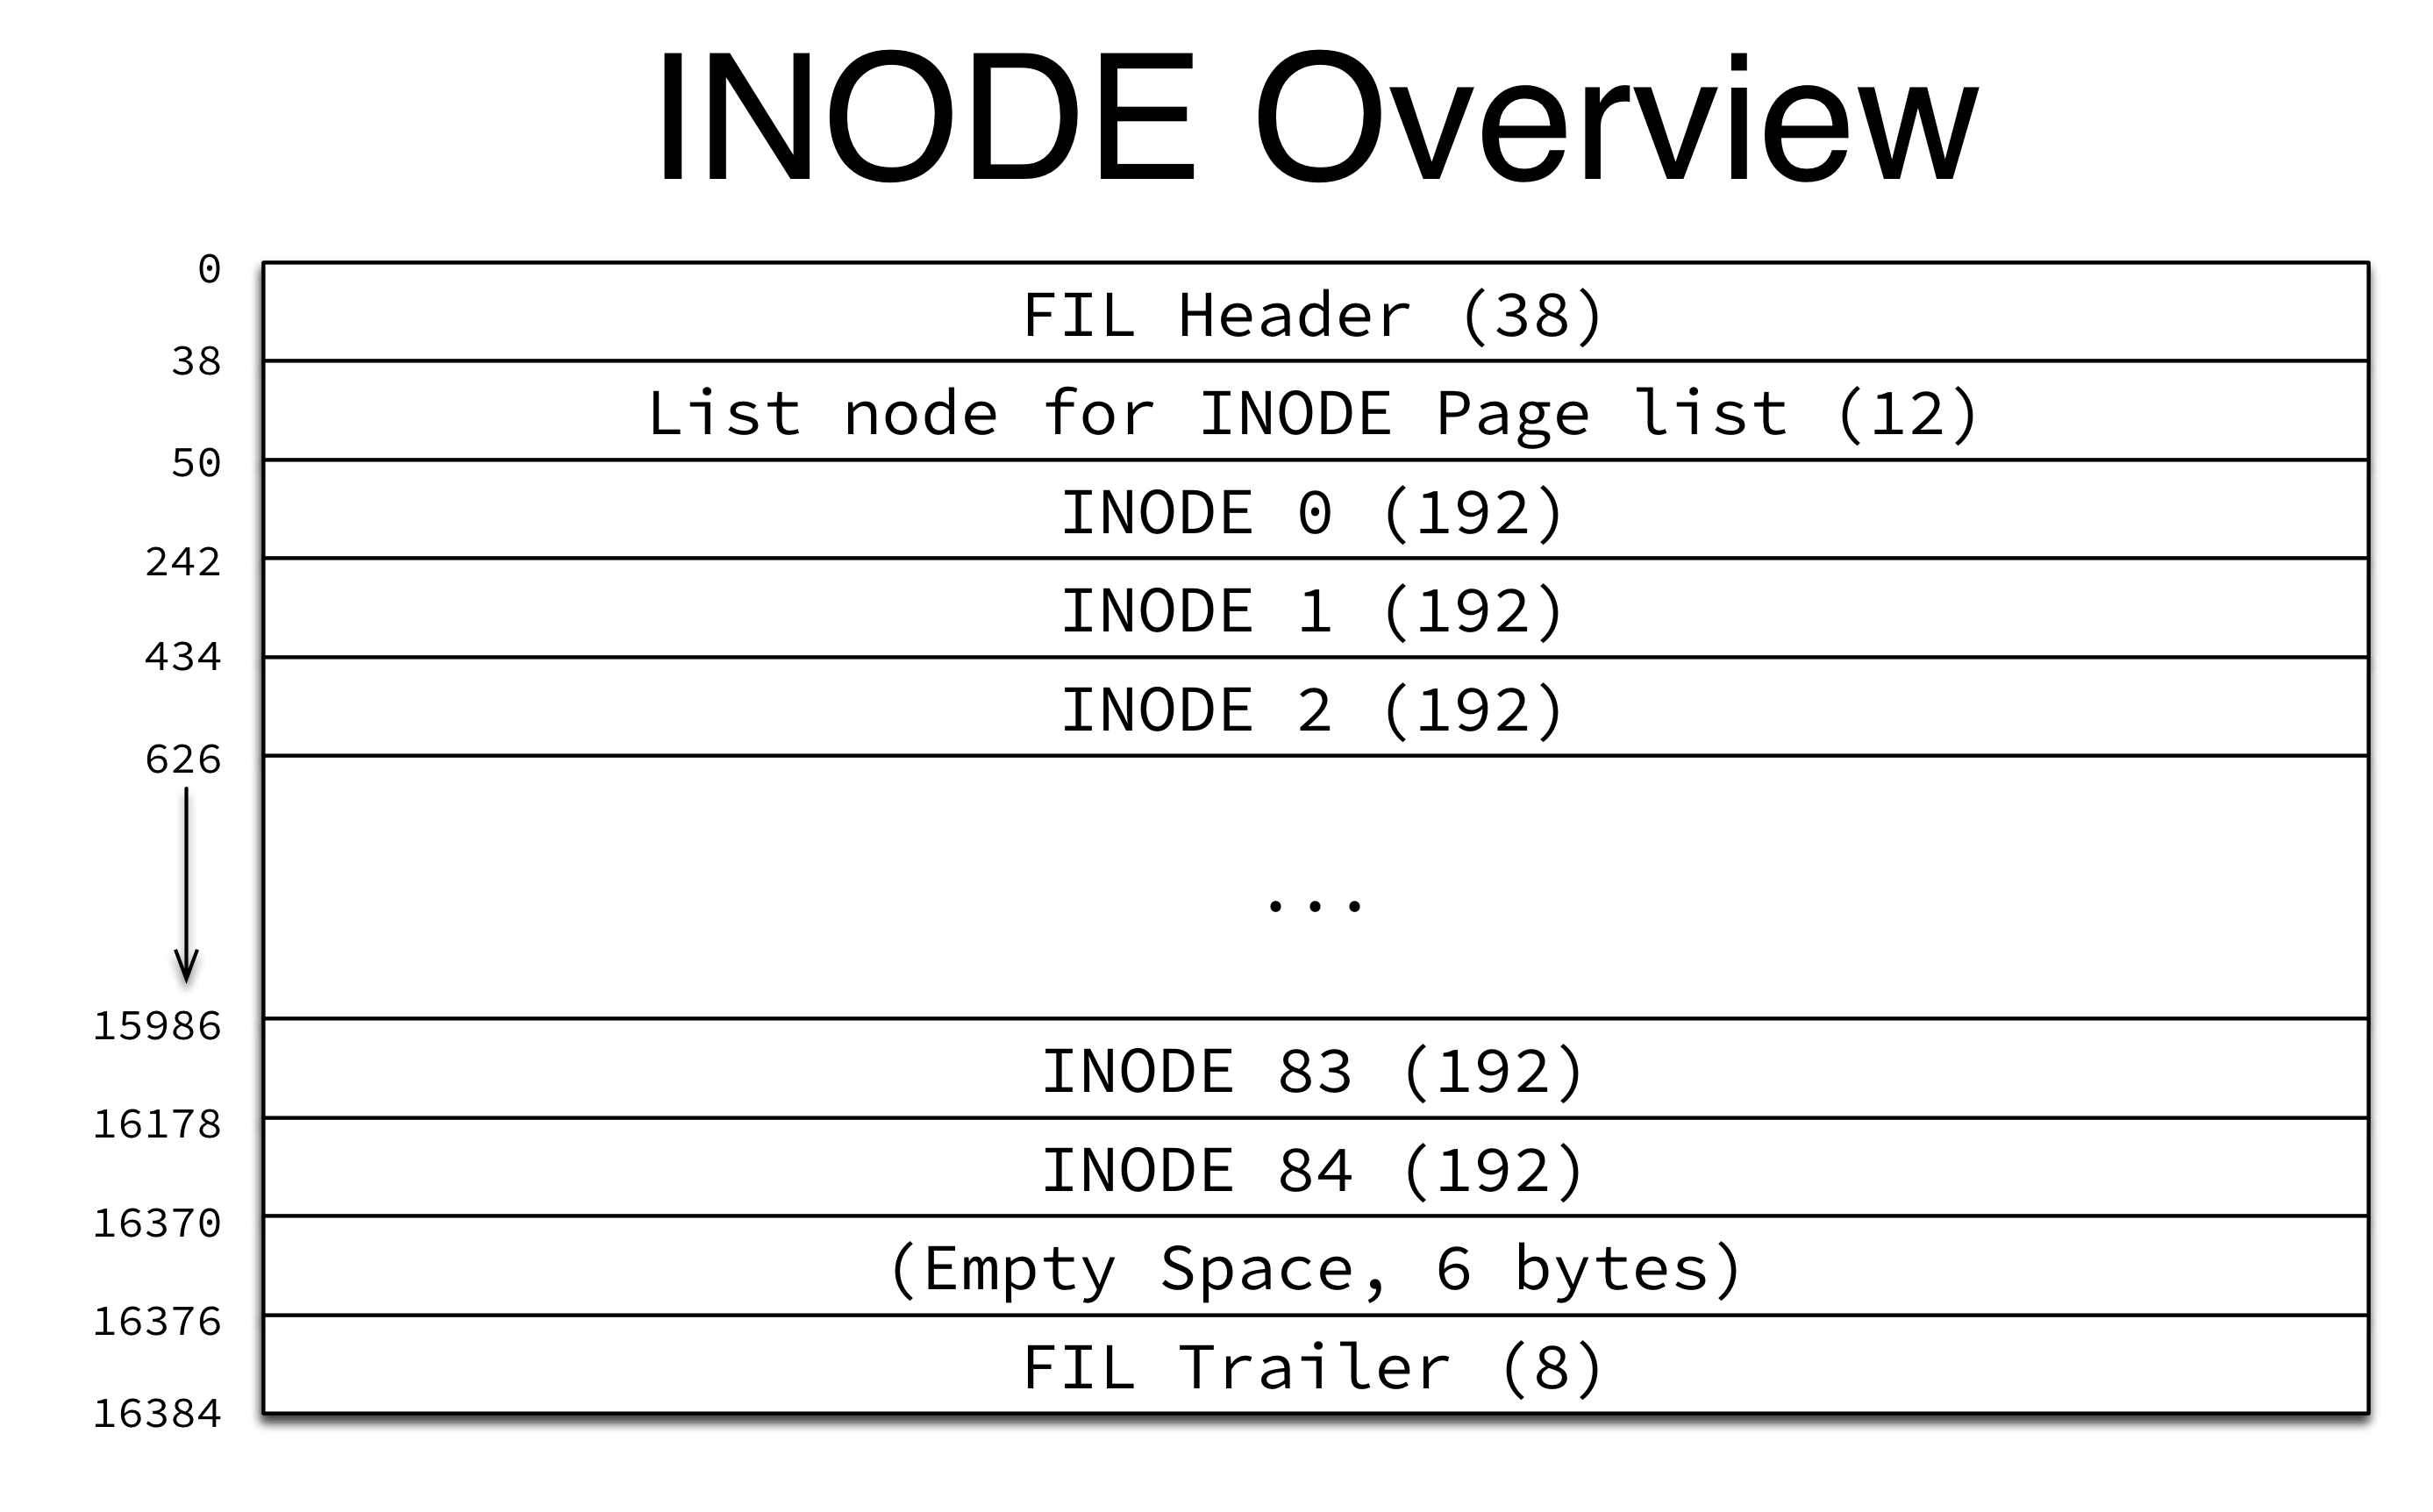 INODE Page Overview